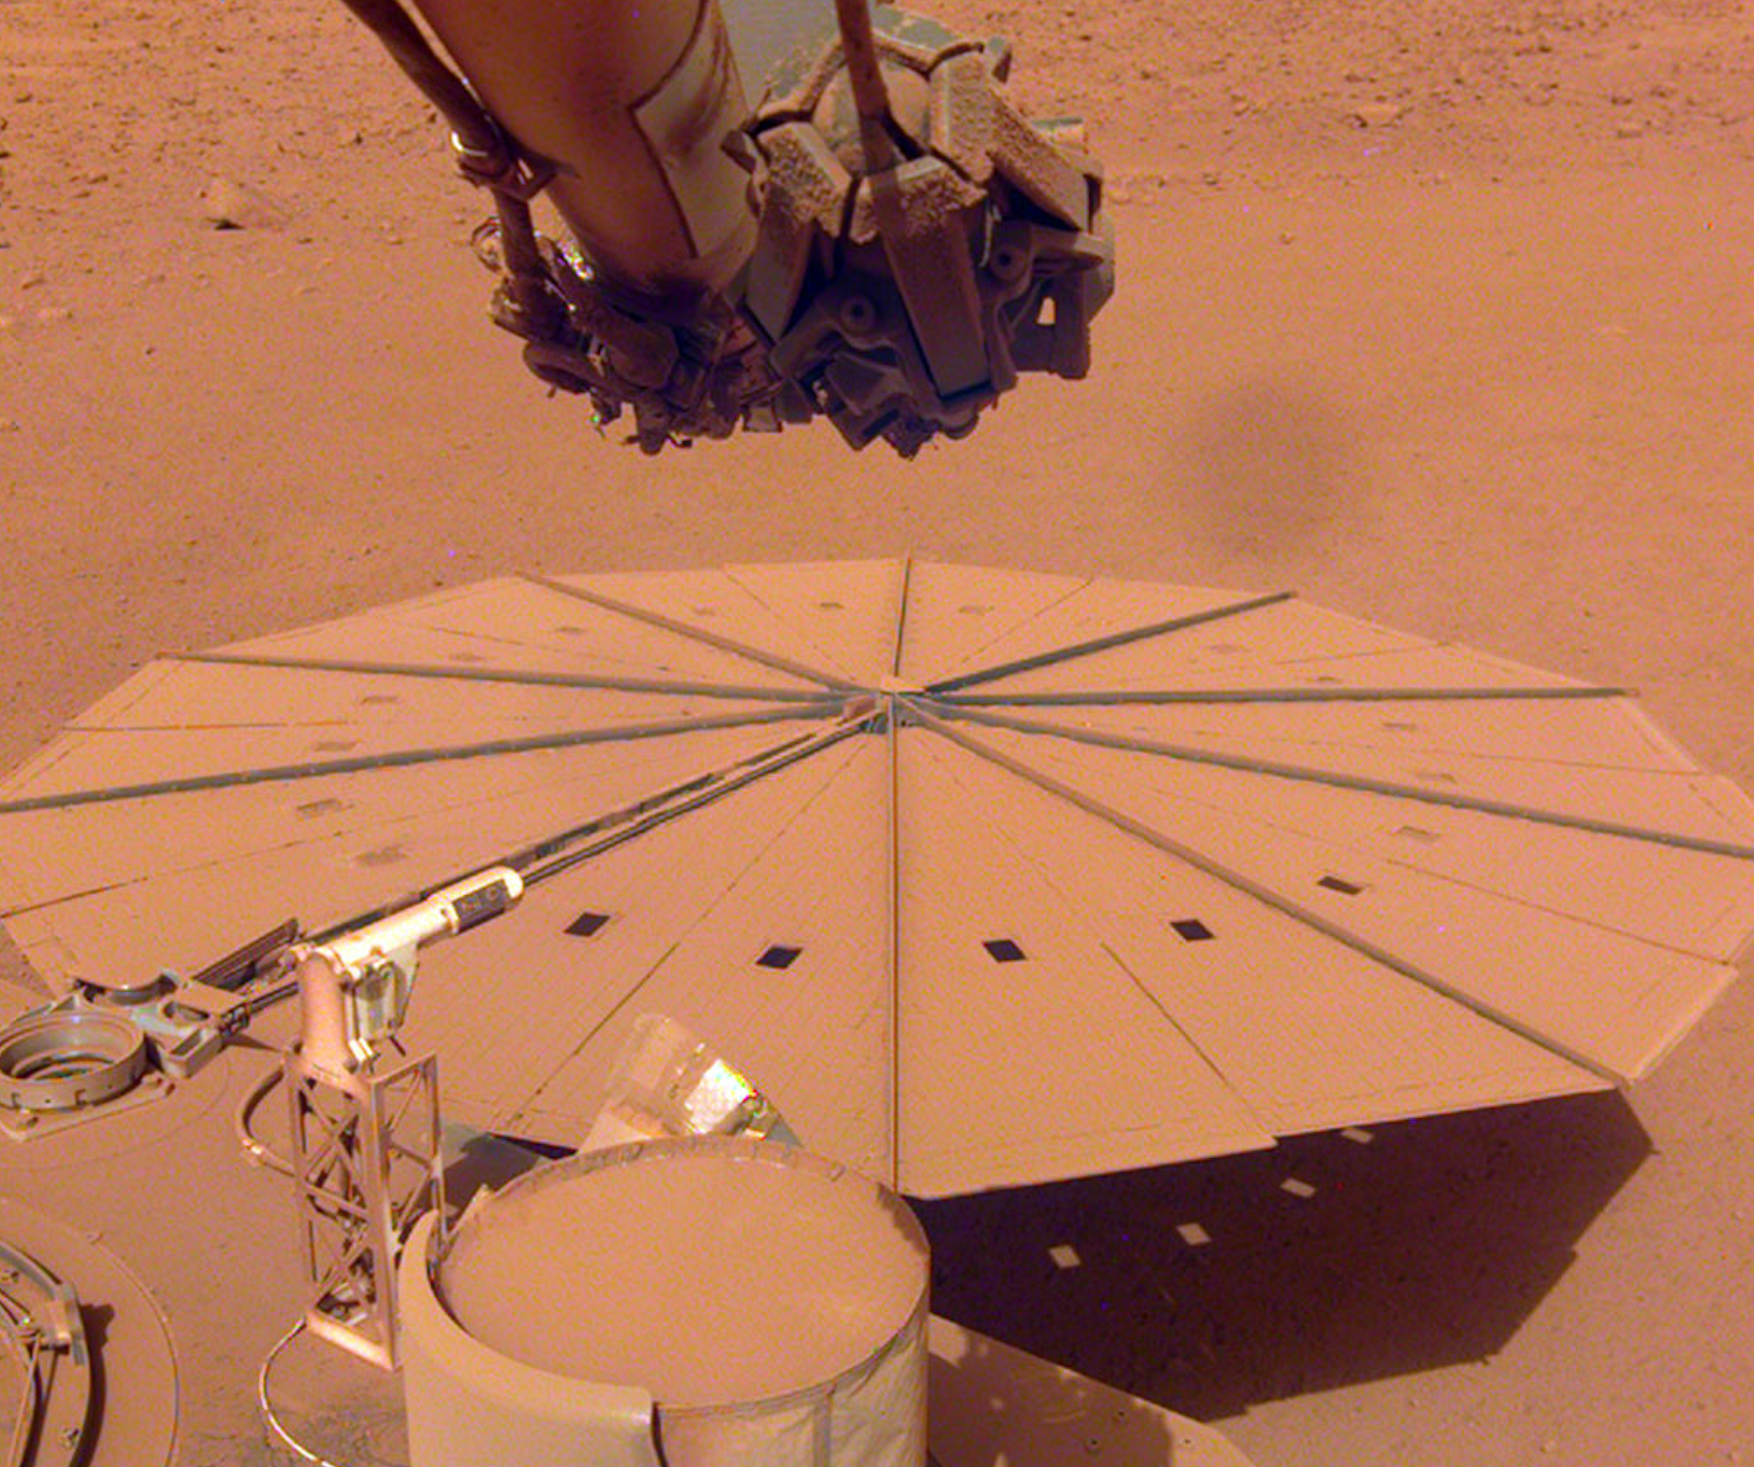 vice.com - NASA's Mars InSight Lander Is Getting Ready to Die - VICE